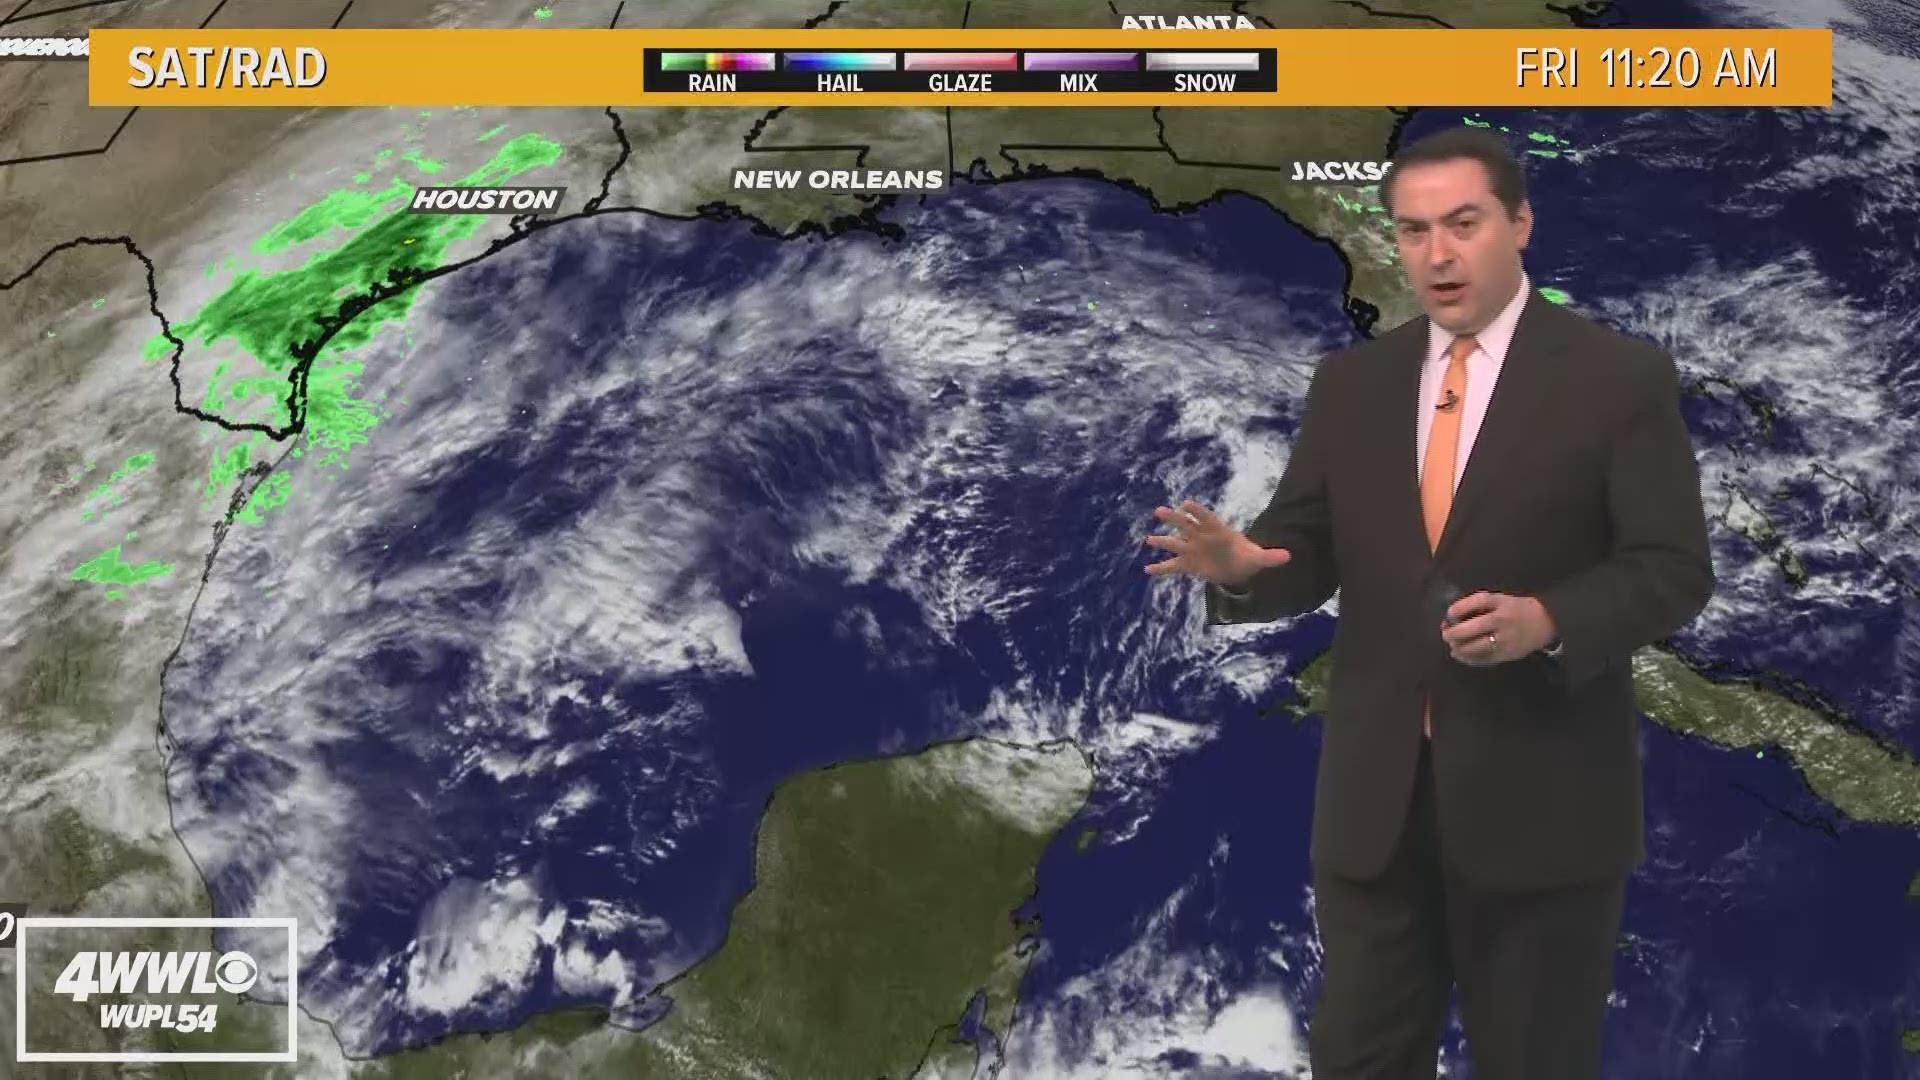 Here's how the weather may have affected the Carnival Glory crash in Cozumel, Mexico, on Dec. 20, according to WWL-TV Meteorologist Dave Nussbaum.